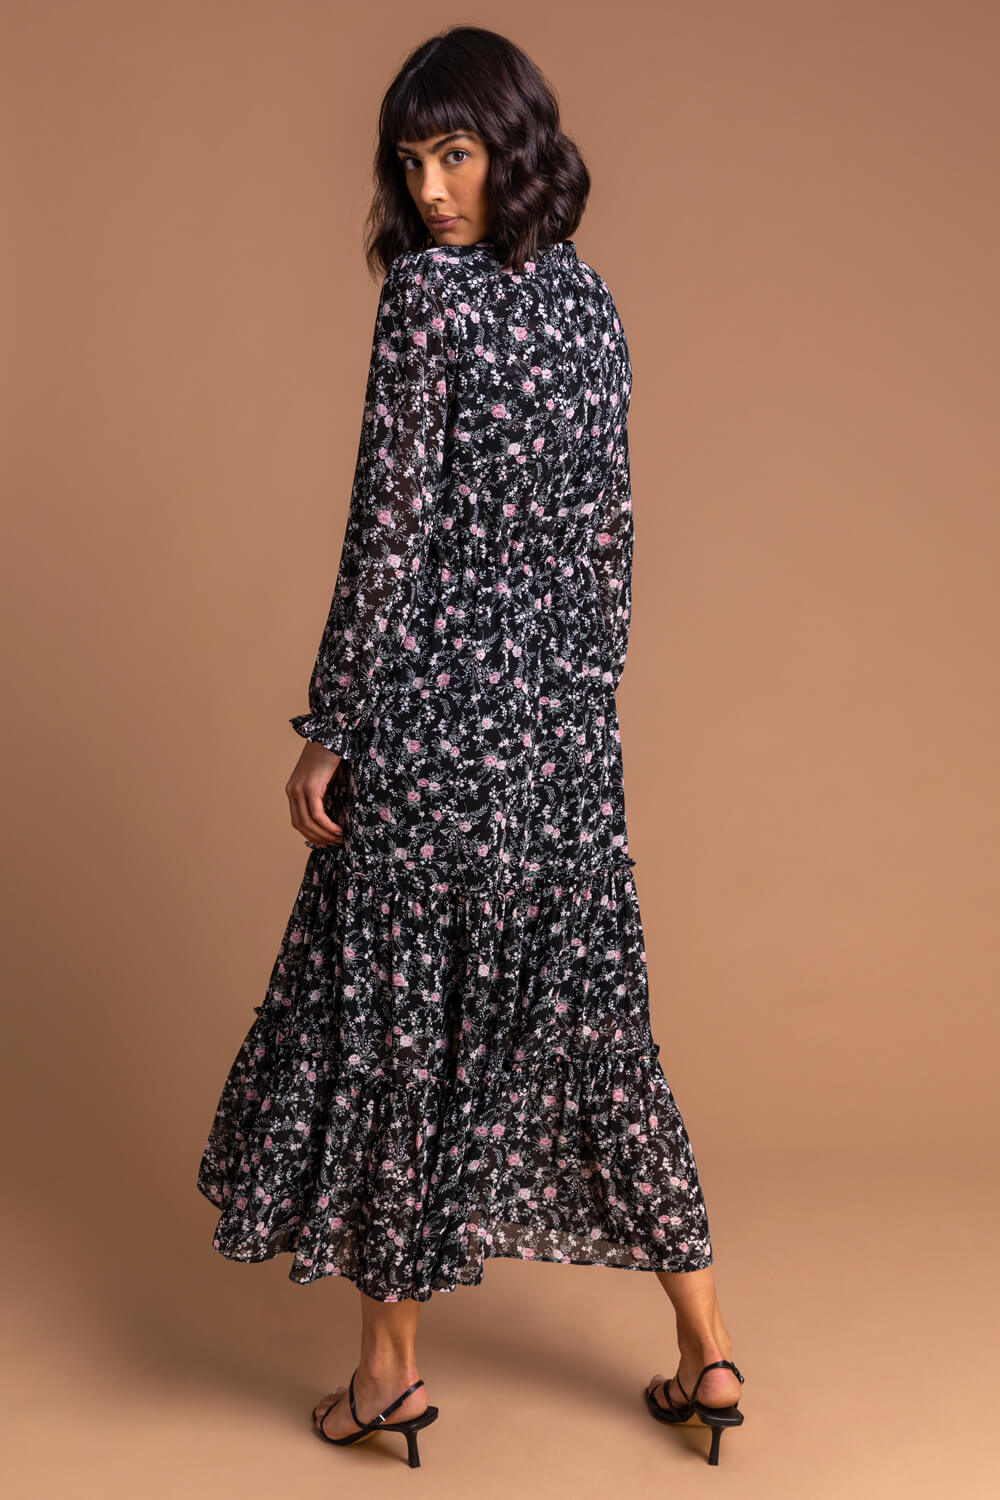 Black Ditsy Floral Tiered Midi Dress, Image 2 of 6